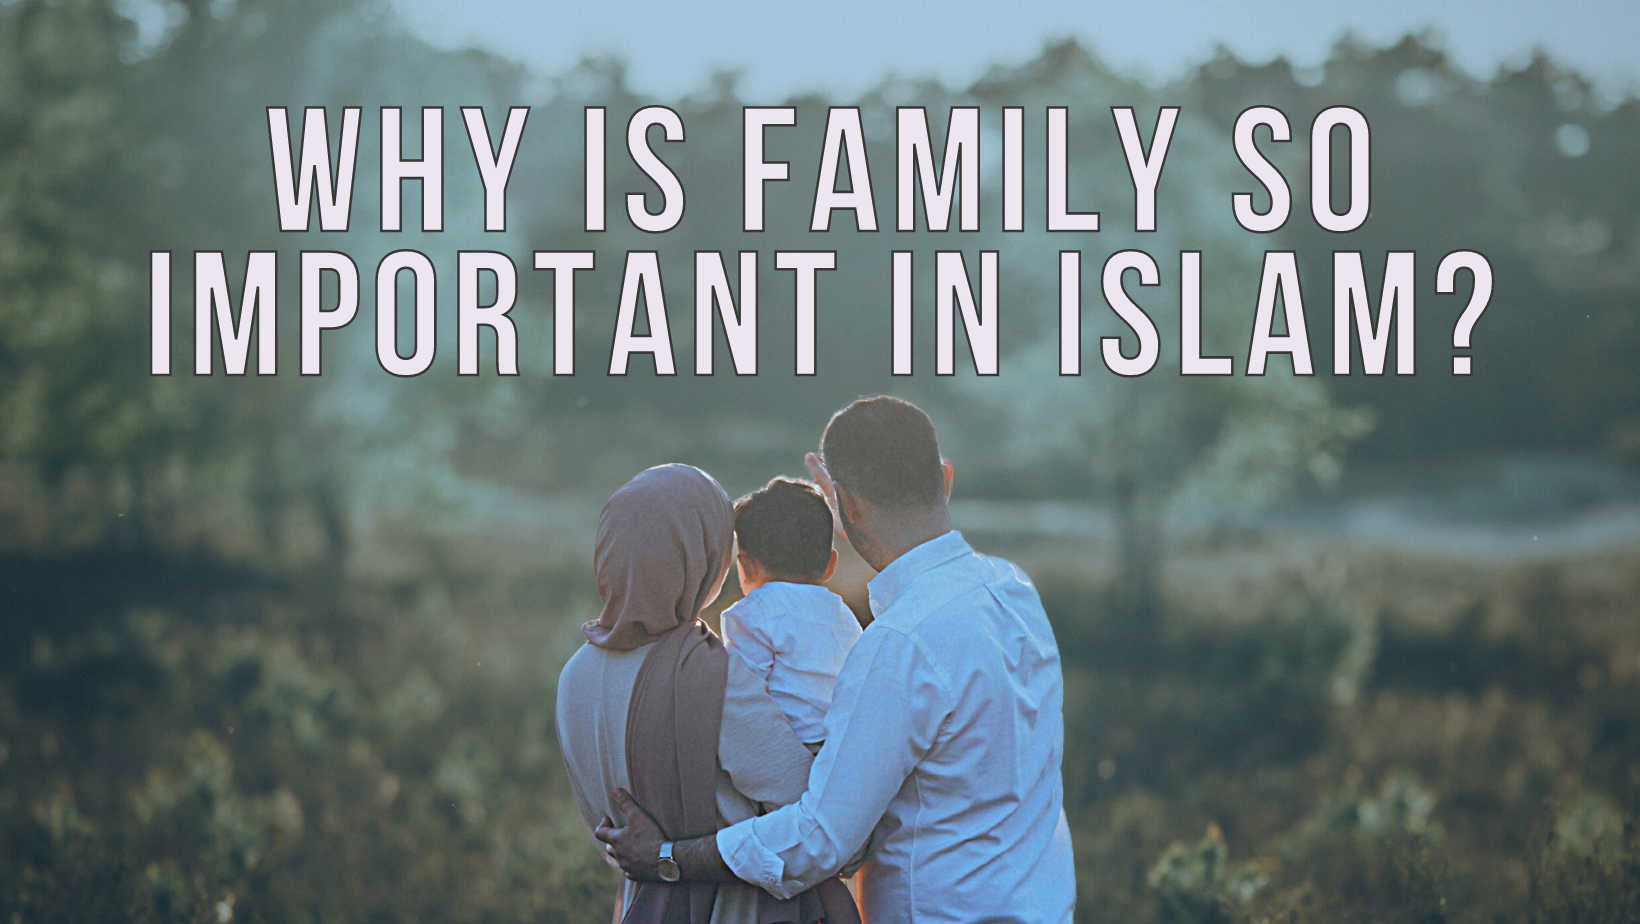 Why is family so important in Islam?